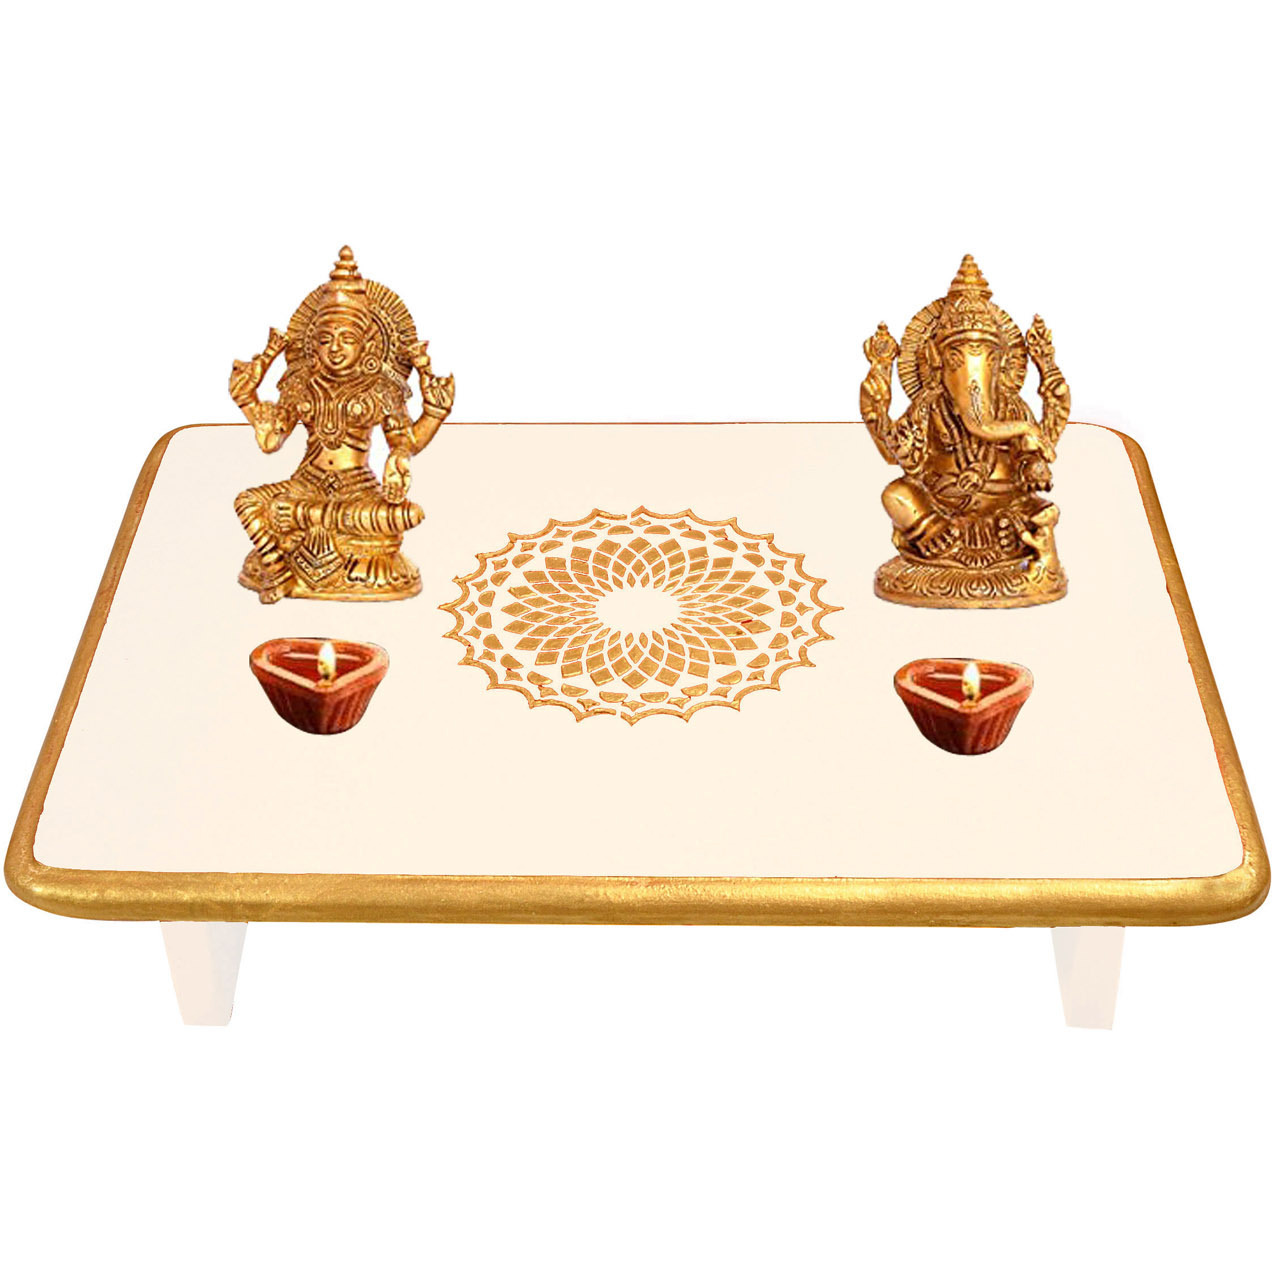 Home decorative Wooden Pata Blue Pooja Chowki Stool 16 x 12 x 4 Inches (Size: 24X15X4, Color: Off-White)